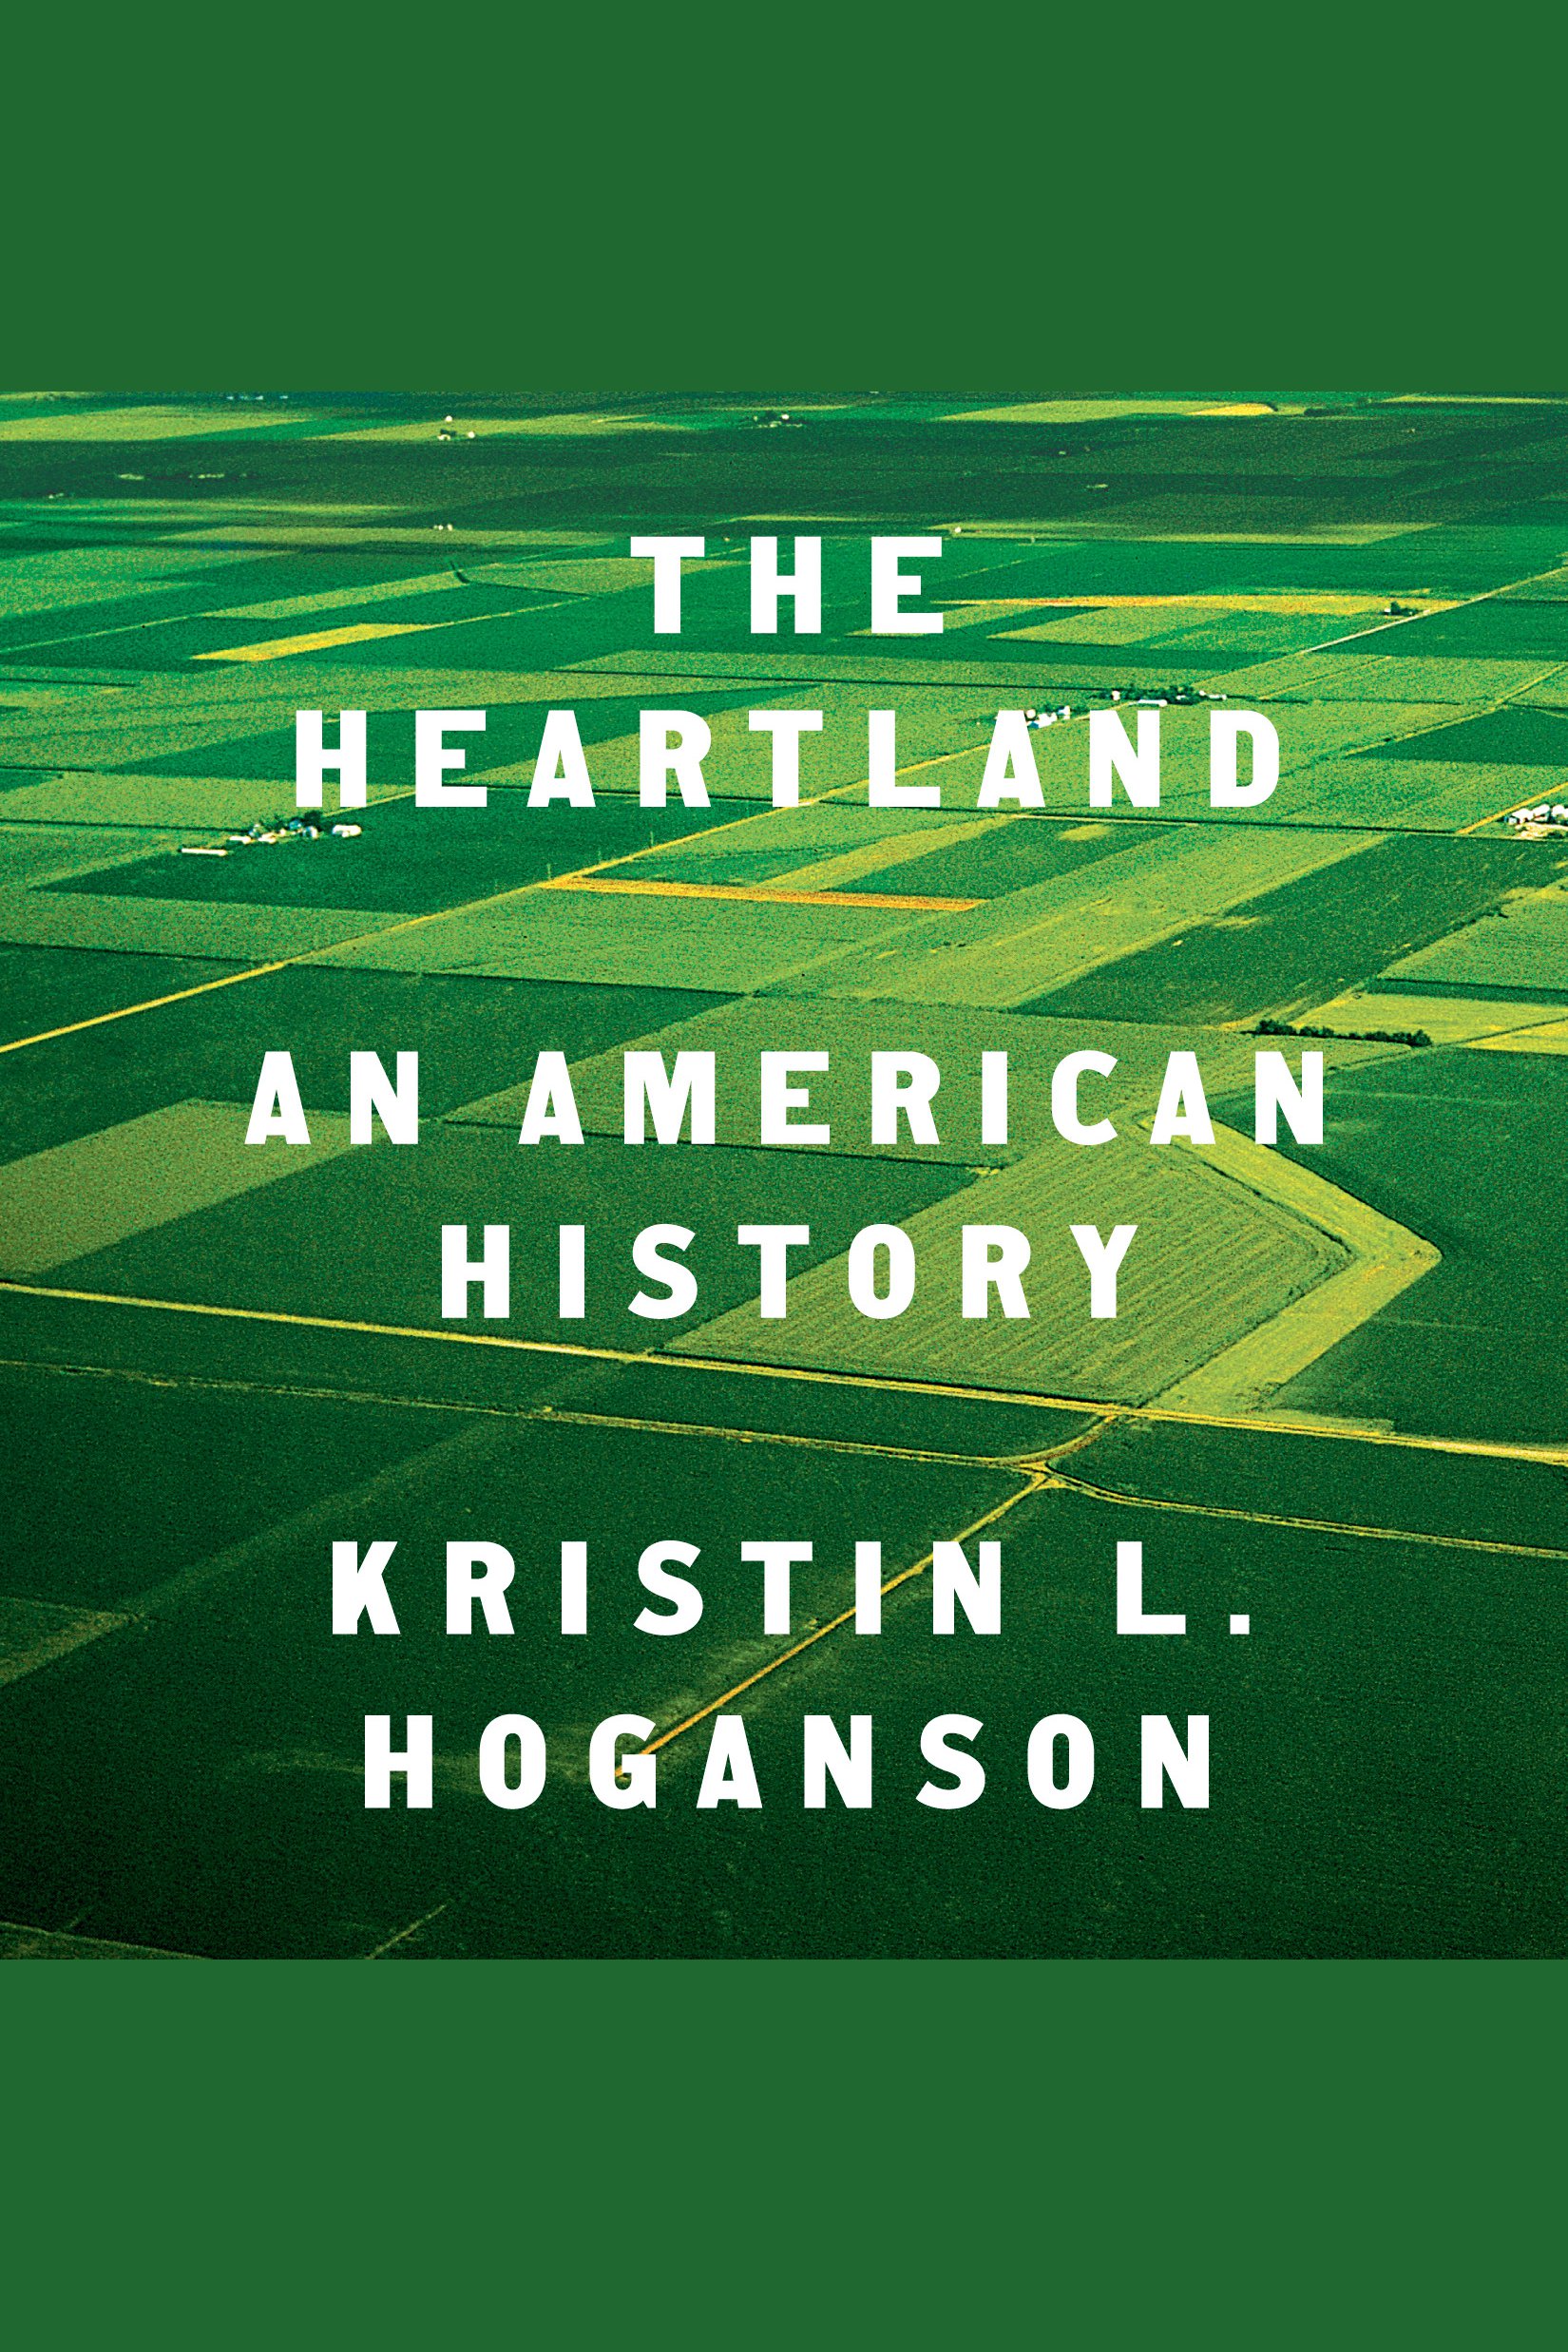 The heartland an American history cover image